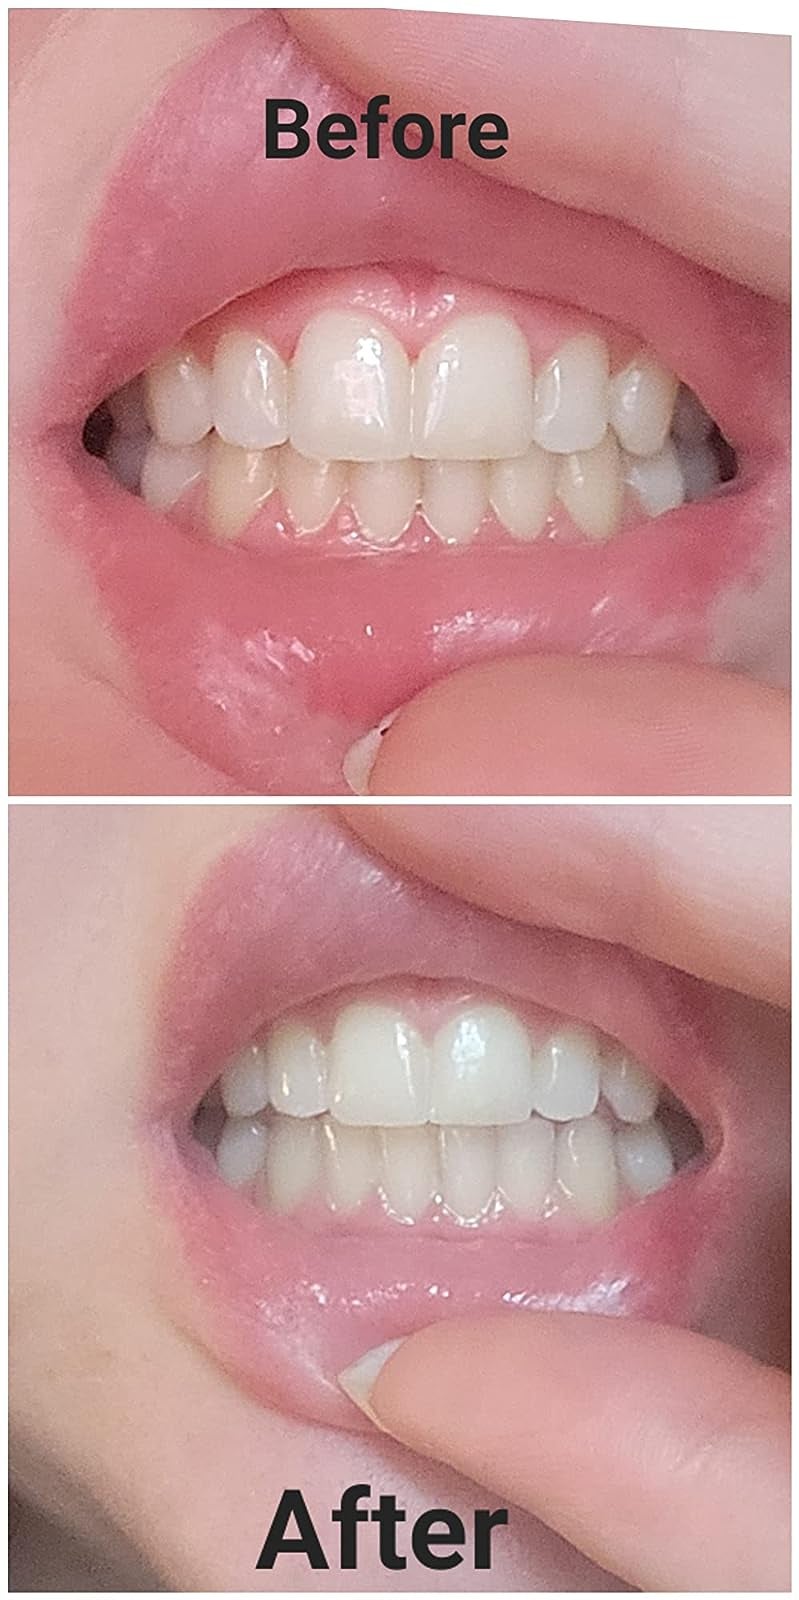 reviewer's teeth before and after using the pens and you can see that the pens lightened their teeth several shades